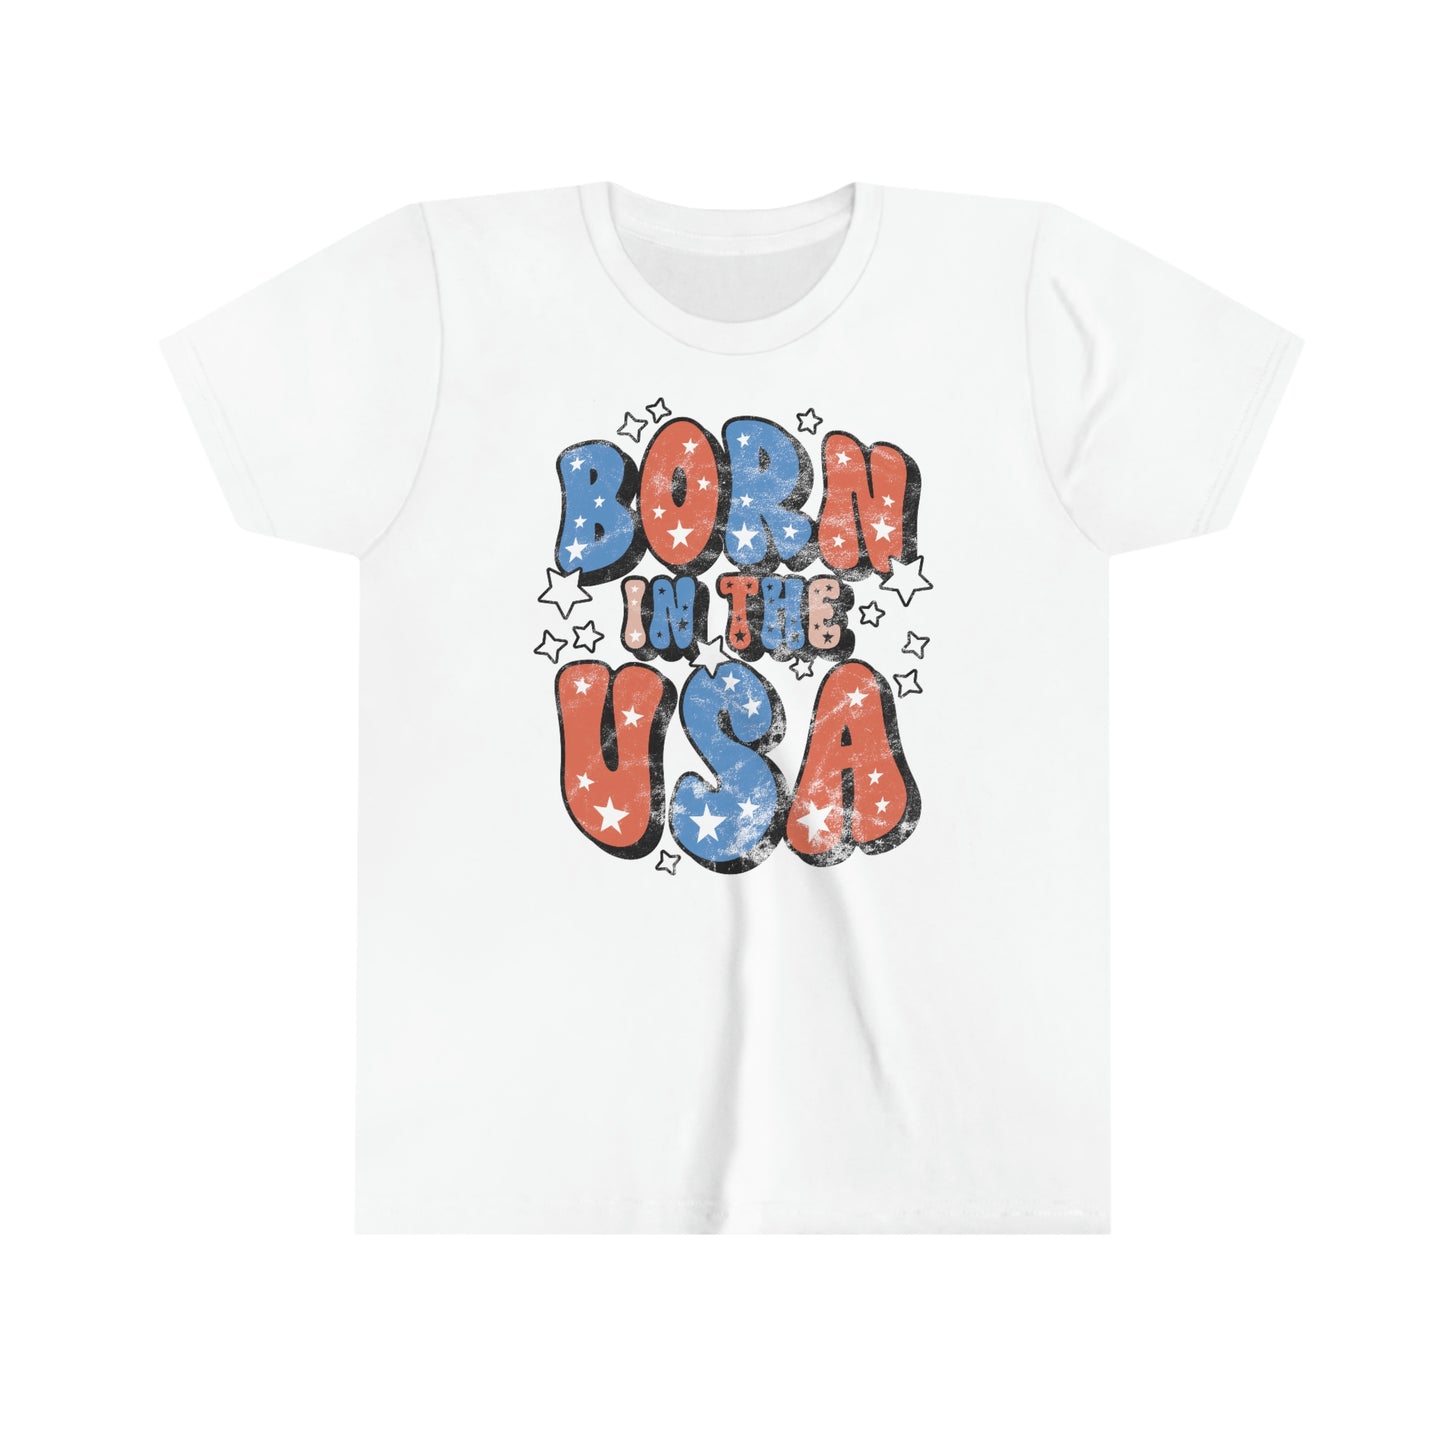 Born in the USA Youth Tee